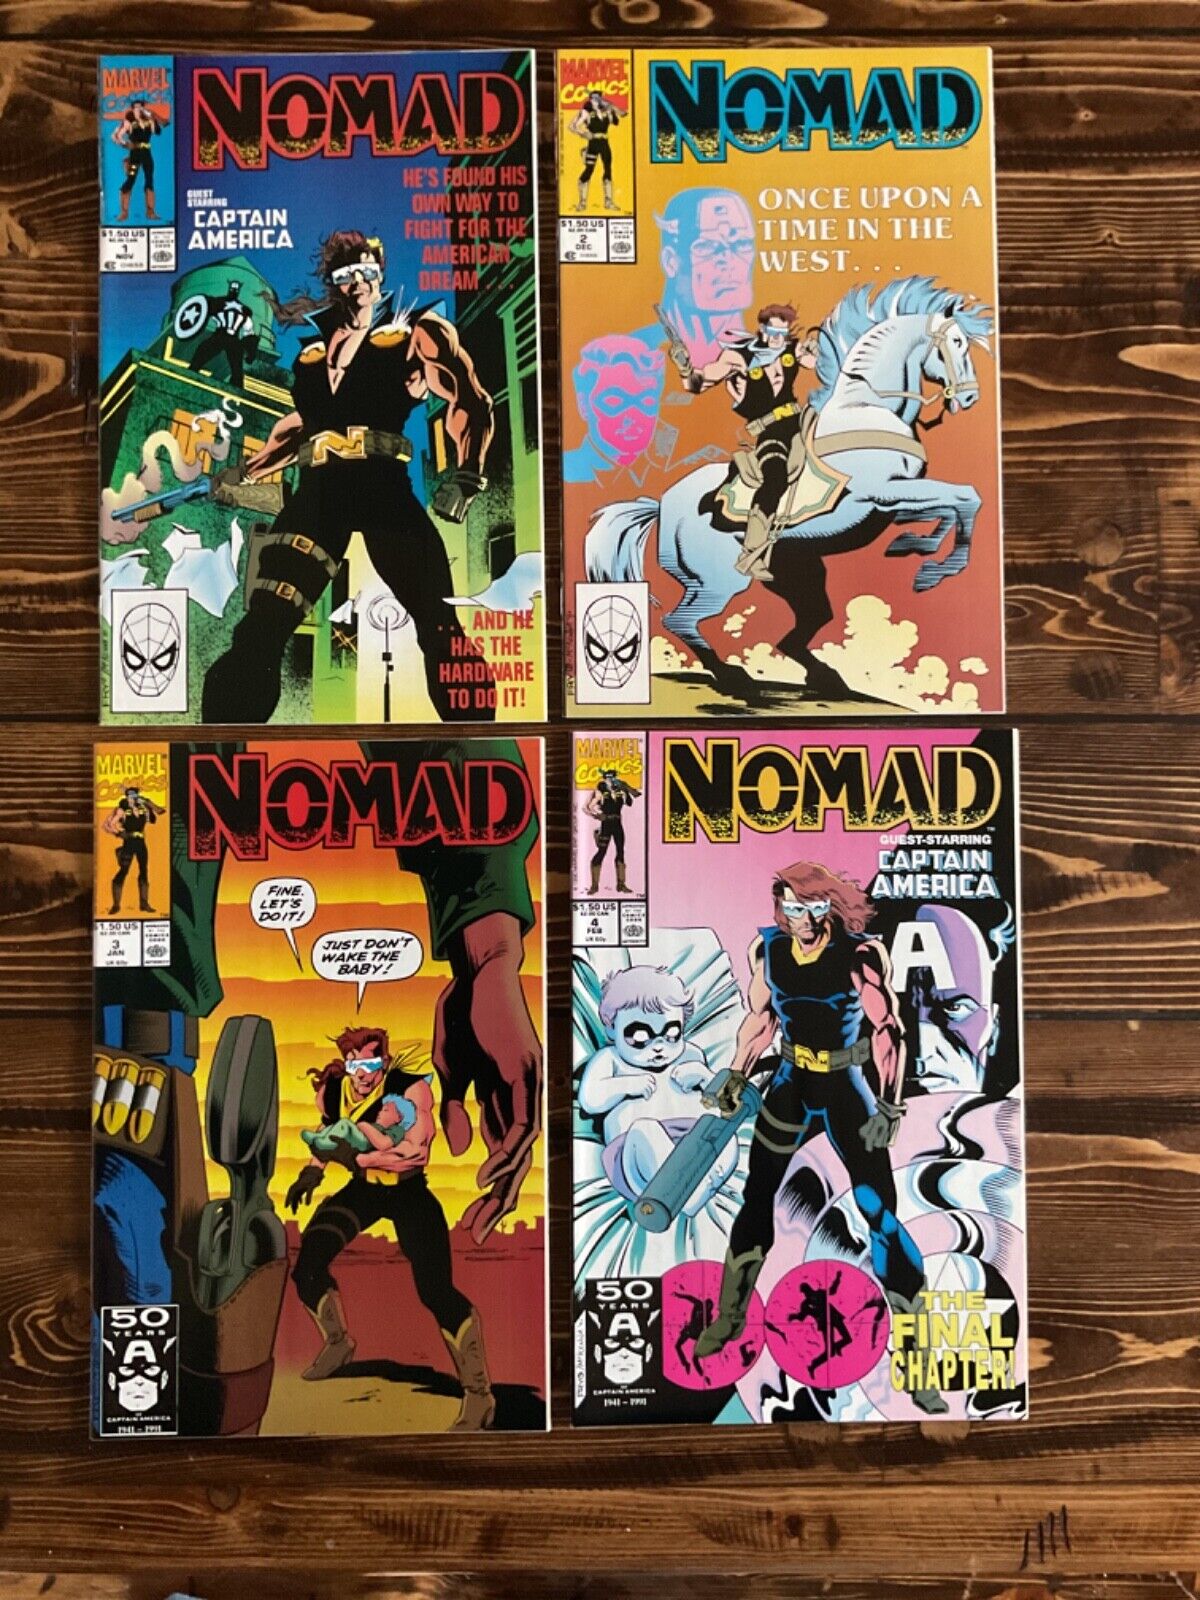 Nomad  # 1 - 4 NM 9.4 Complete limited series